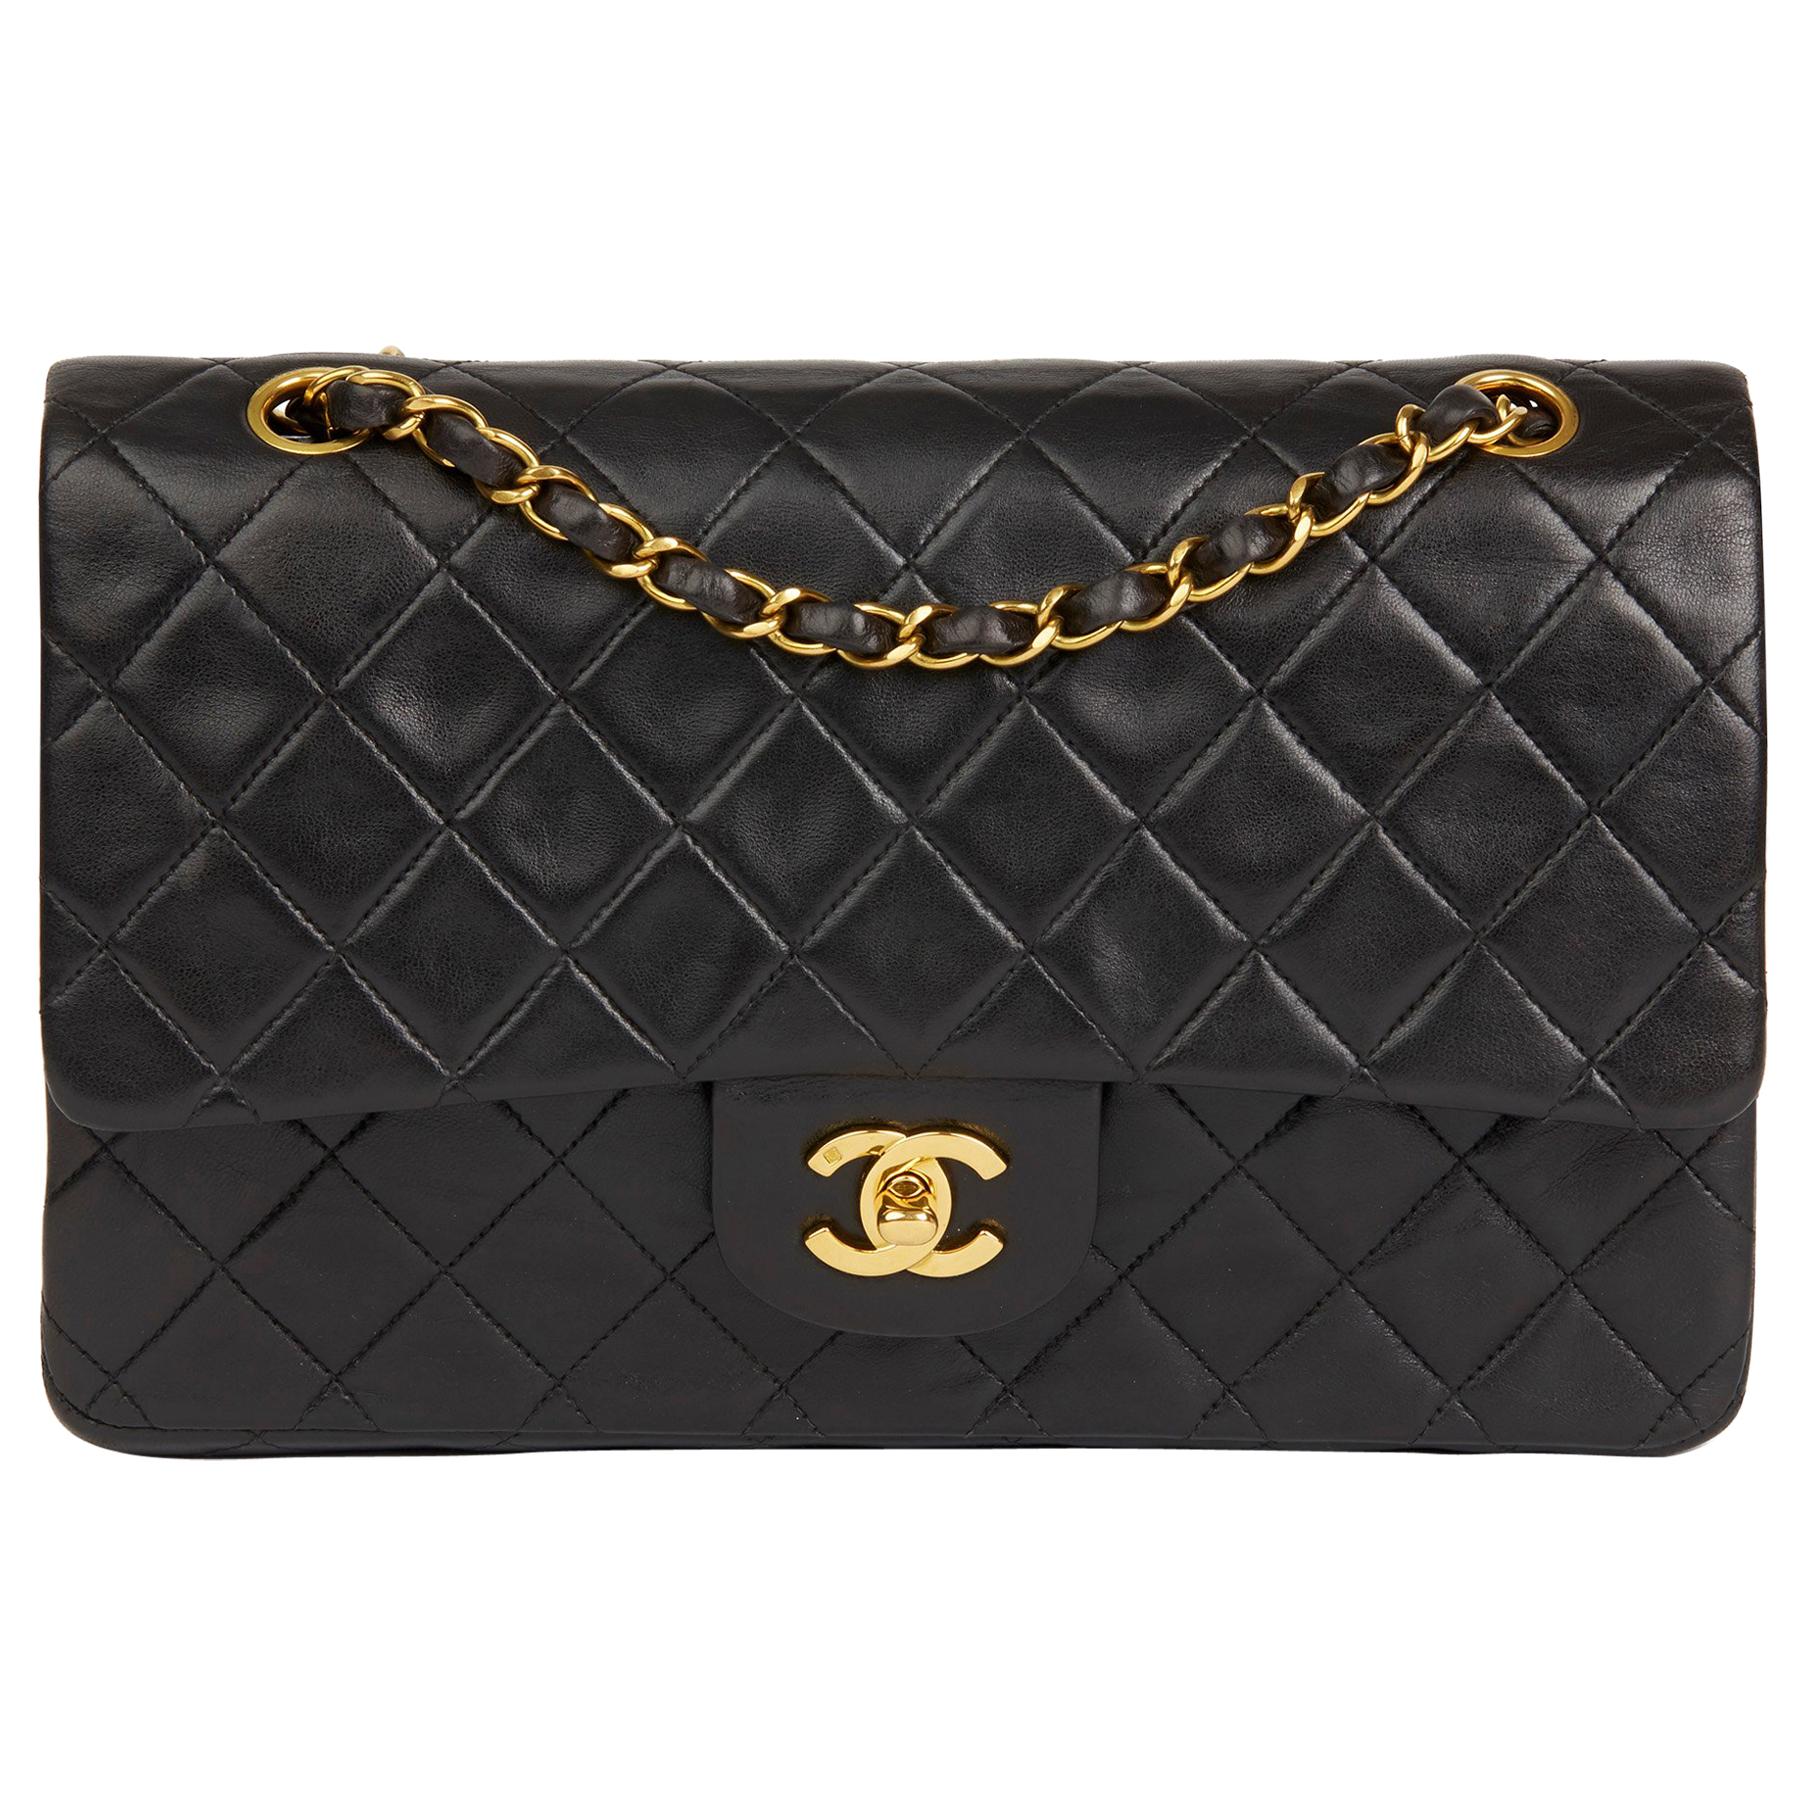 1996 Chanel Black Quilted Lambskin Vintage Medium Classic Double Flap Bag